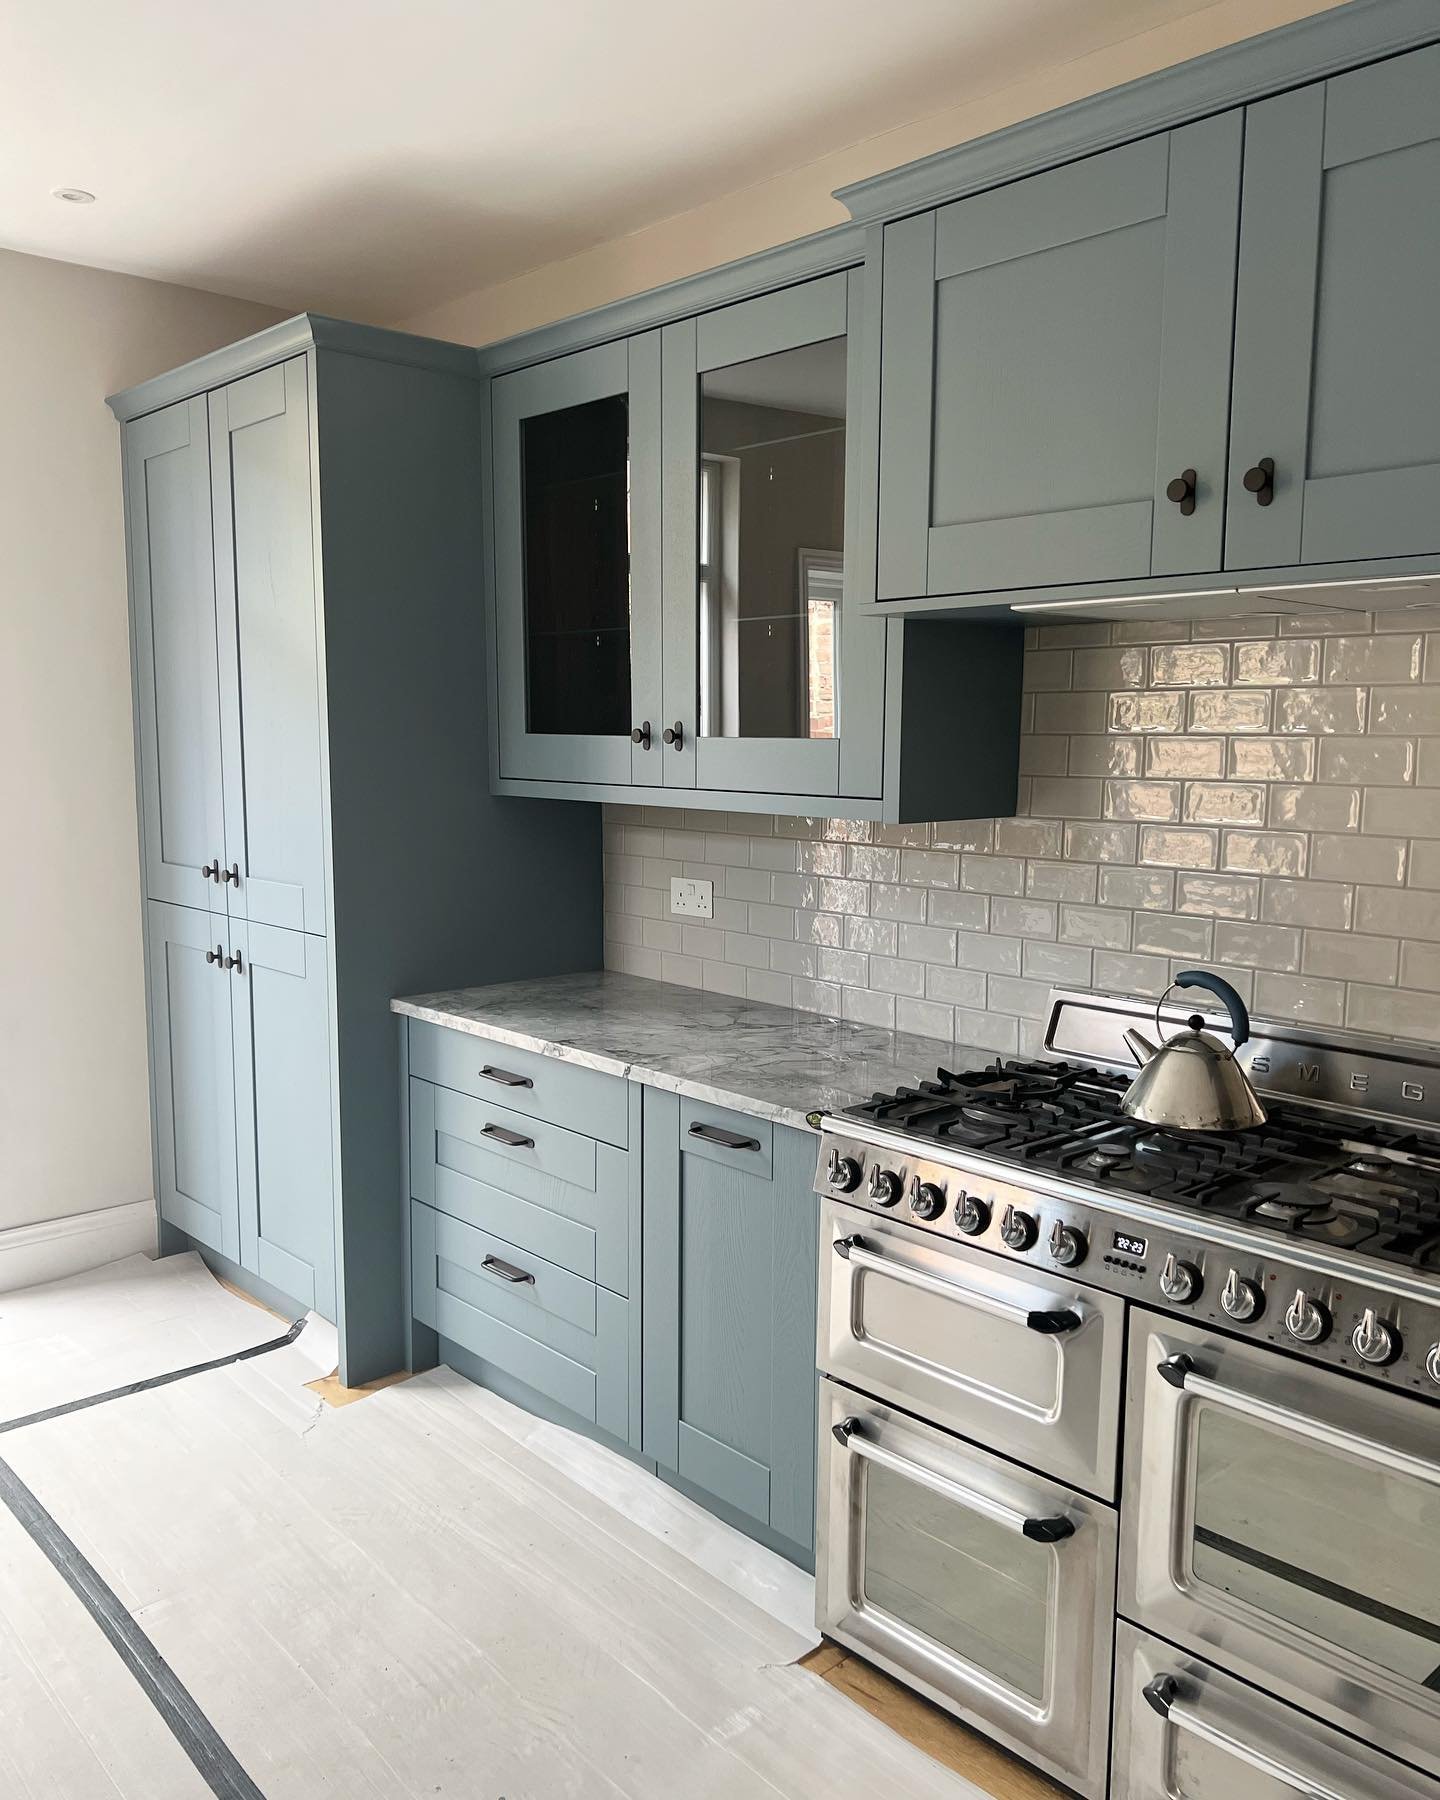 What a difference a bit of colour can make! After and before of this kitchen repainted in Farrow and Ball De Nimes

#handpainted #handpaintedkitchen #kitchenrepaint #specialistpainting #paintedkitchen #paintedkitchencabinets #denimesfarrowandball #bl